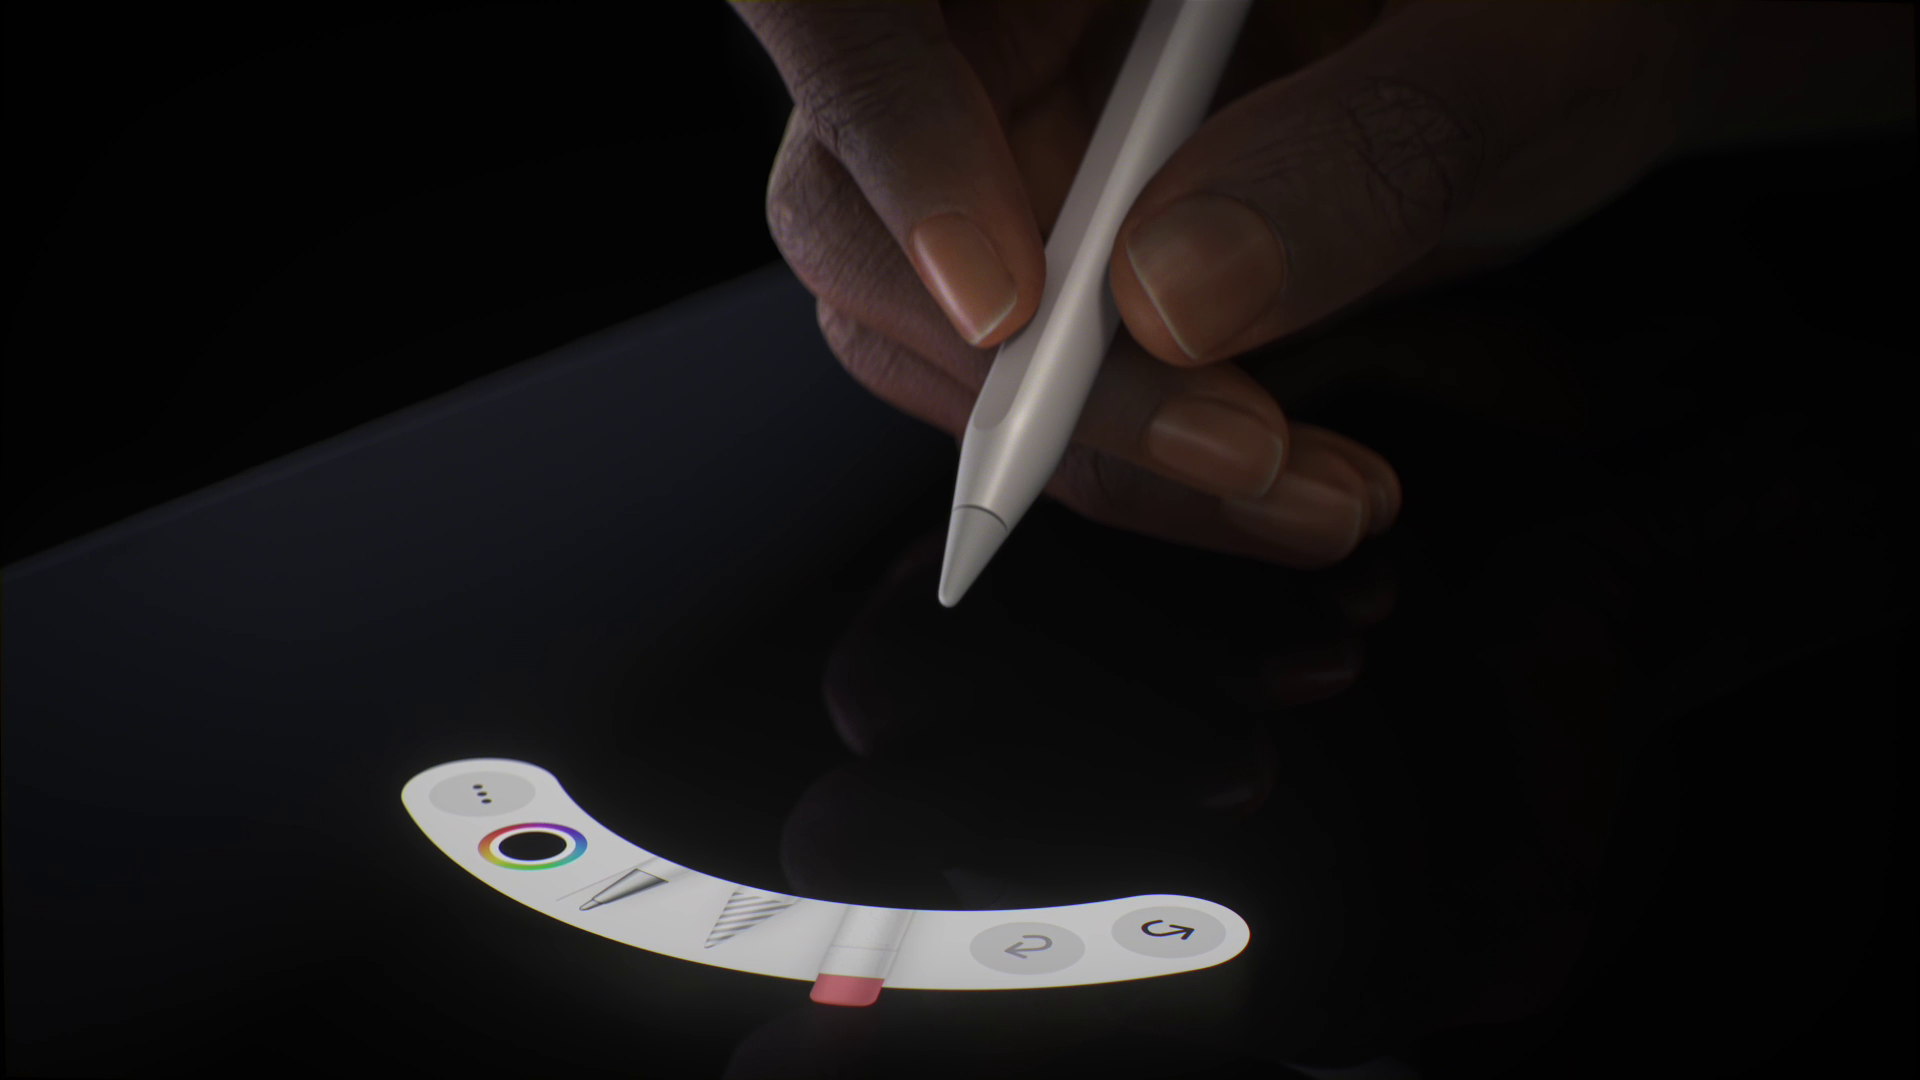 Both iPad Air and iPad Pro support the advanced Apple Pencil Pro